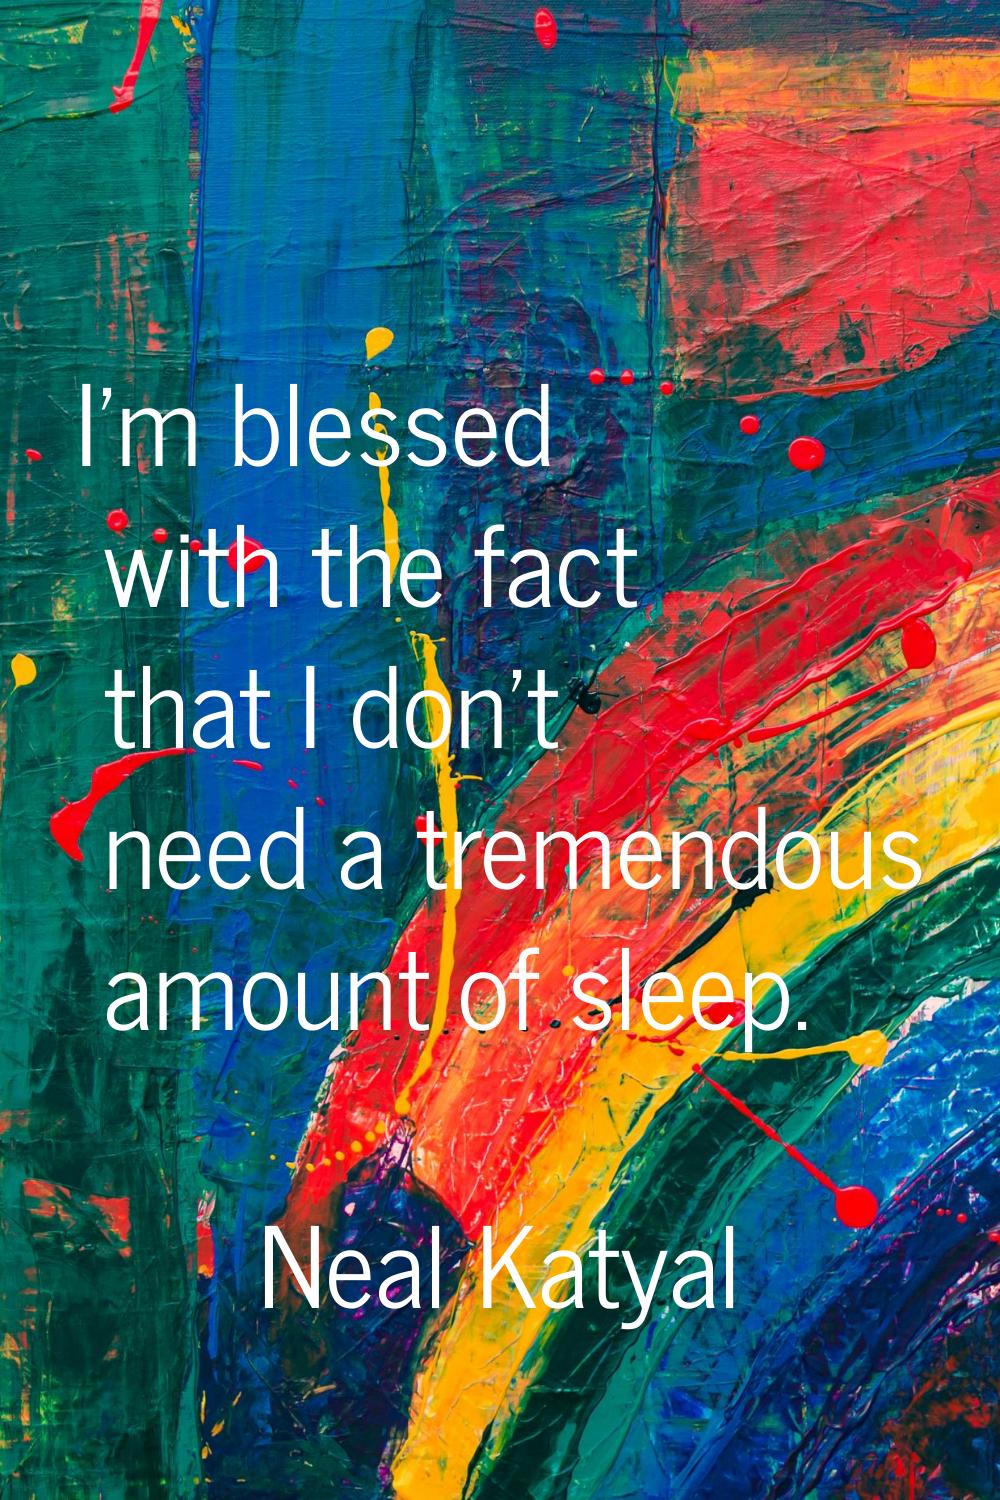 I'm blessed with the fact that I don't need a tremendous amount of sleep.